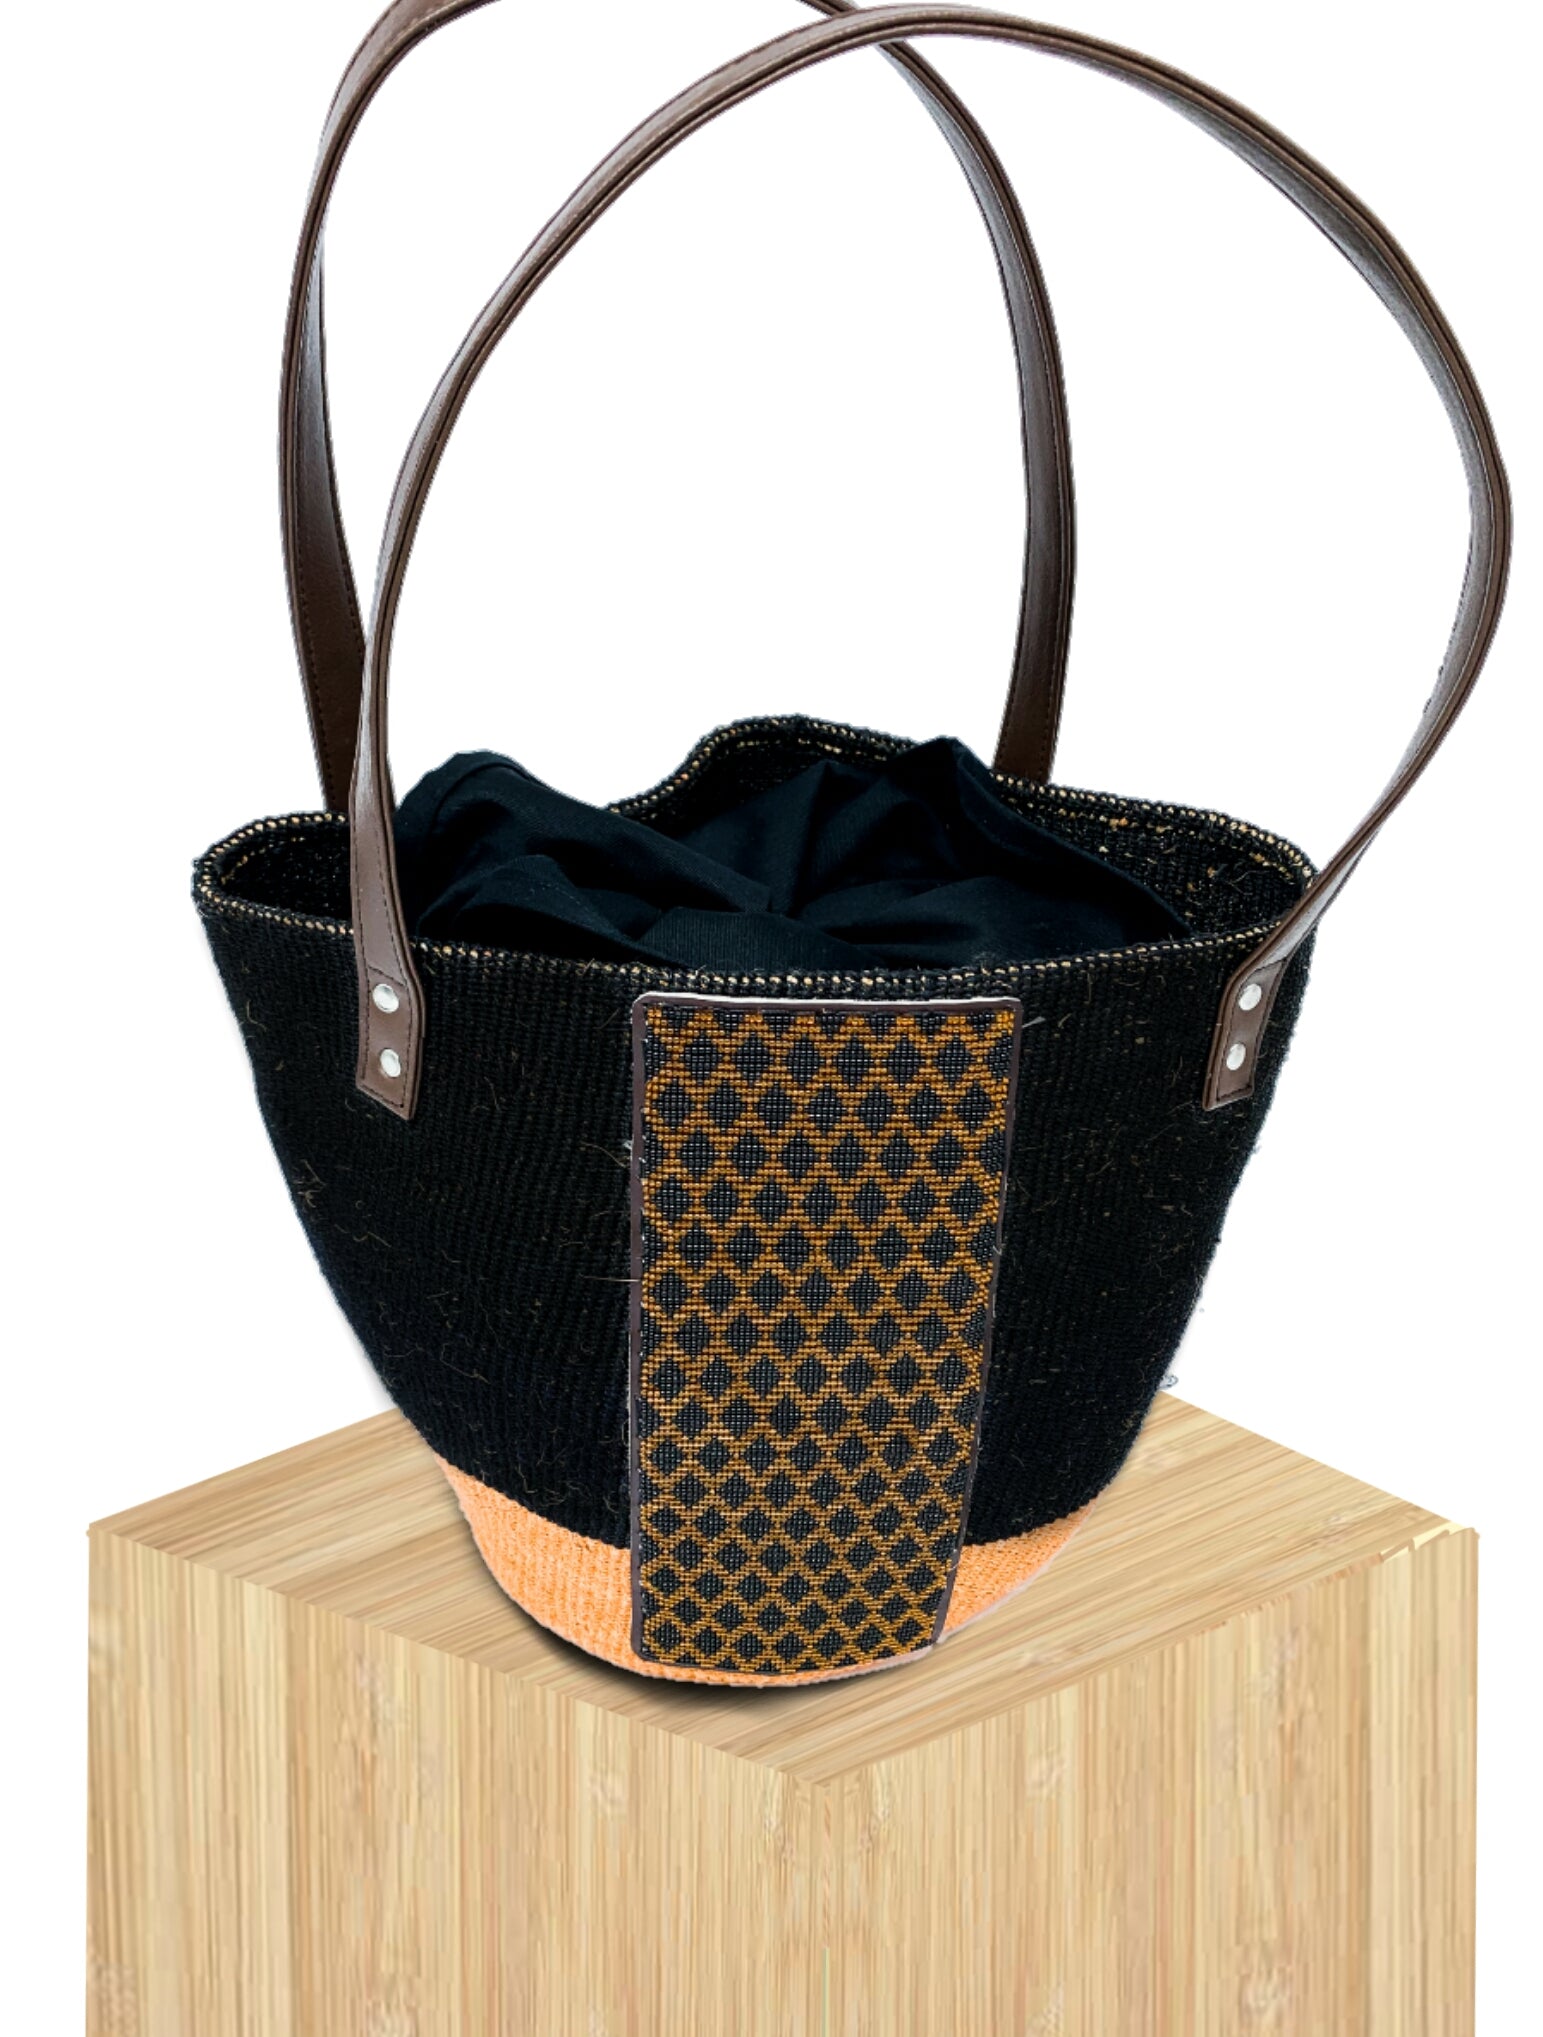 Handwoven Basket Bag - French Market Basket & Moroccan Basket Style, Natural Straw Beach Tote with Leather Handles